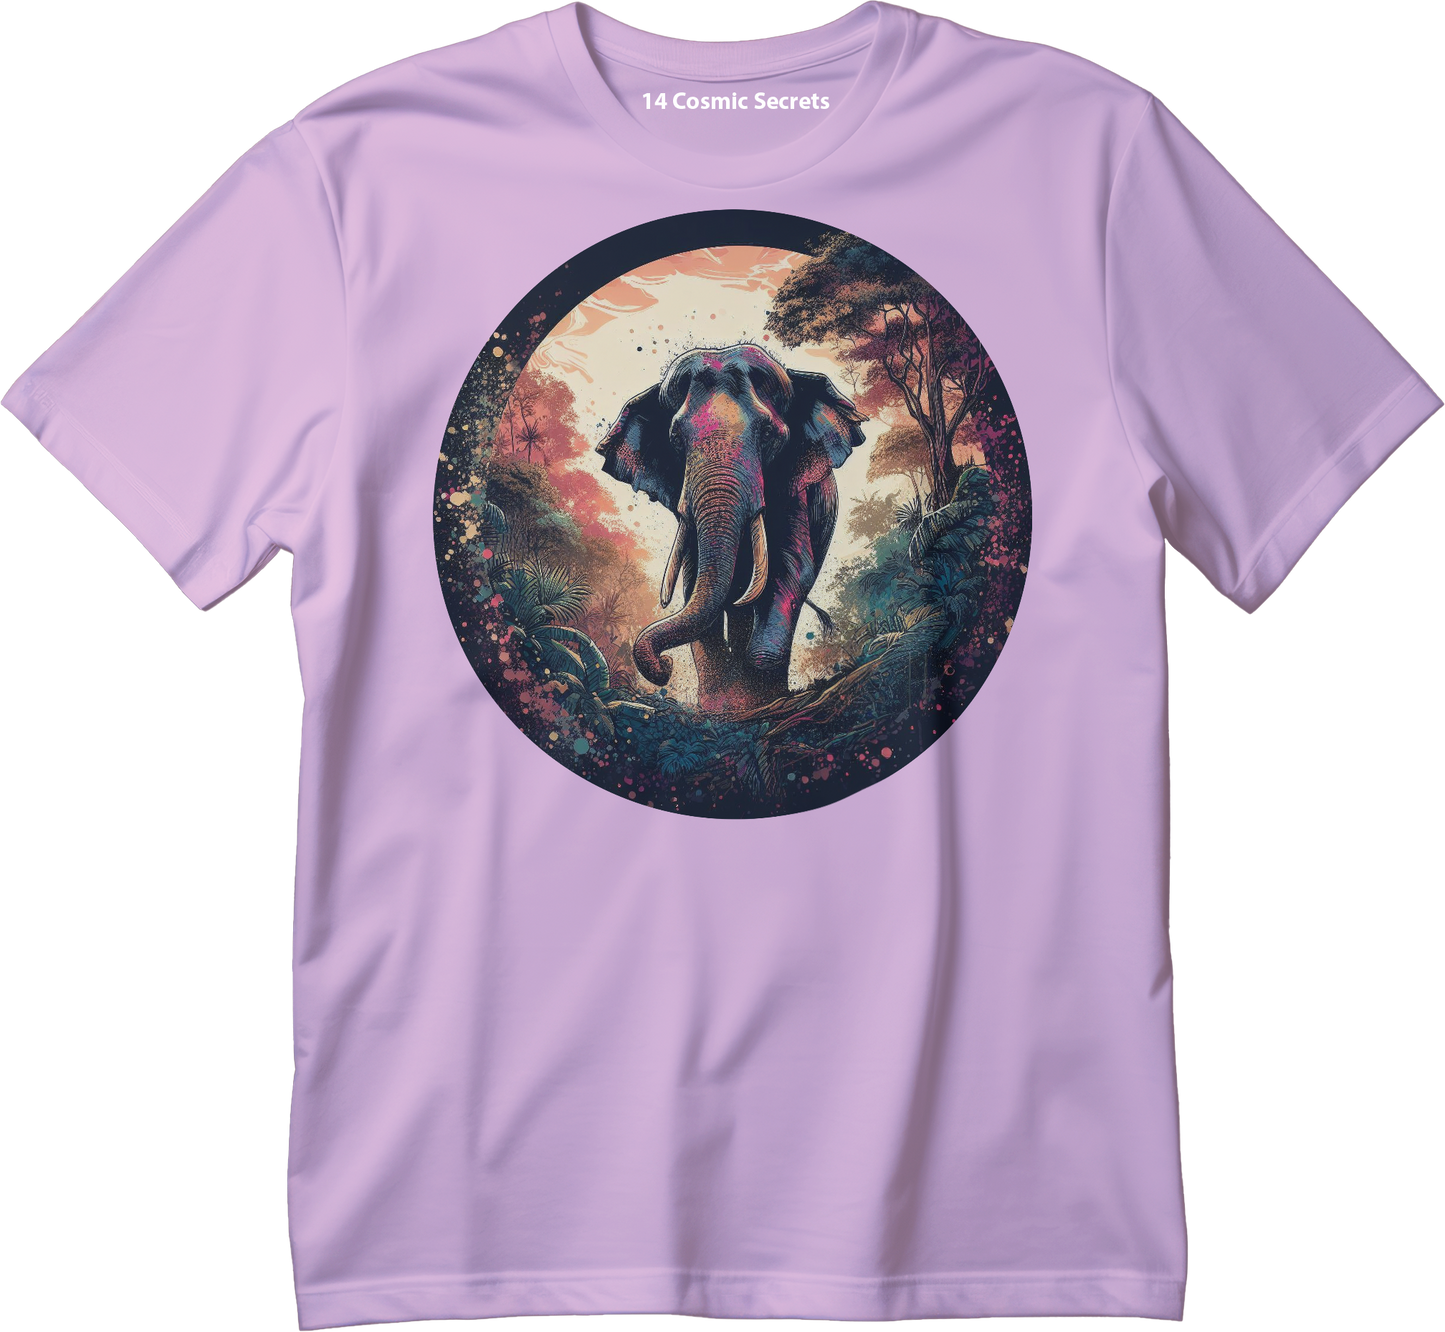 Elephant Majesty Tee  Graphic Printed T-Shirt  Cotton T-Shirt Magnificence of India T-Shirt